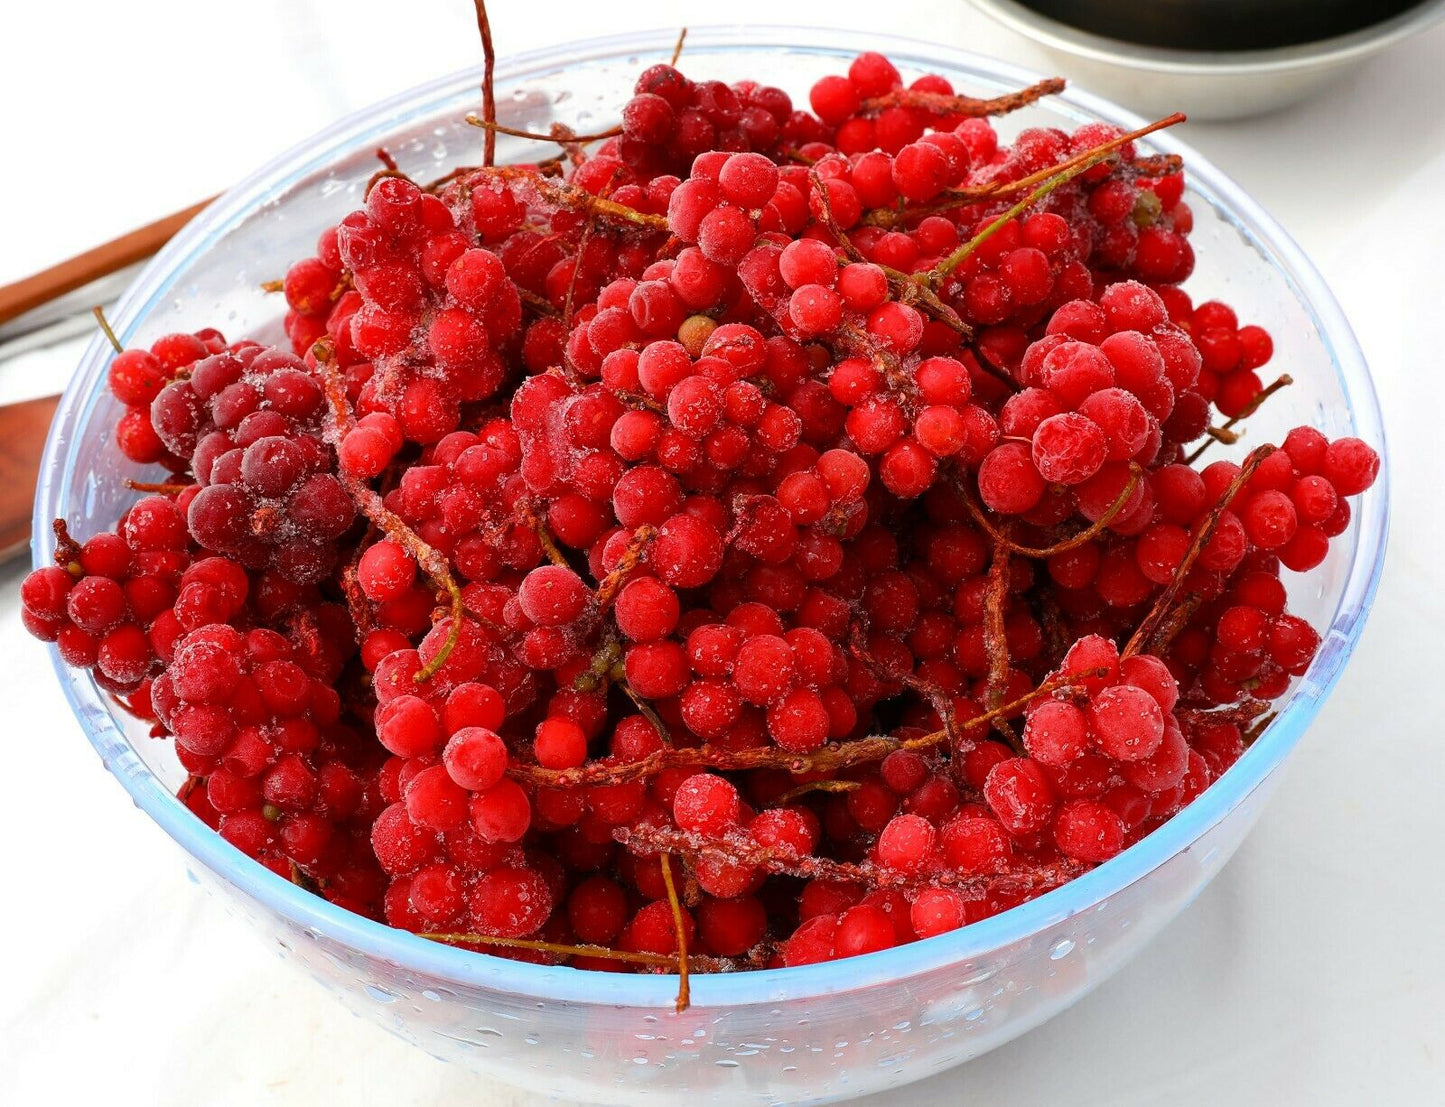 Five Flavor Berry (Schisandra Chinensis) | 五味子 | 10+ Seeds | Hardy